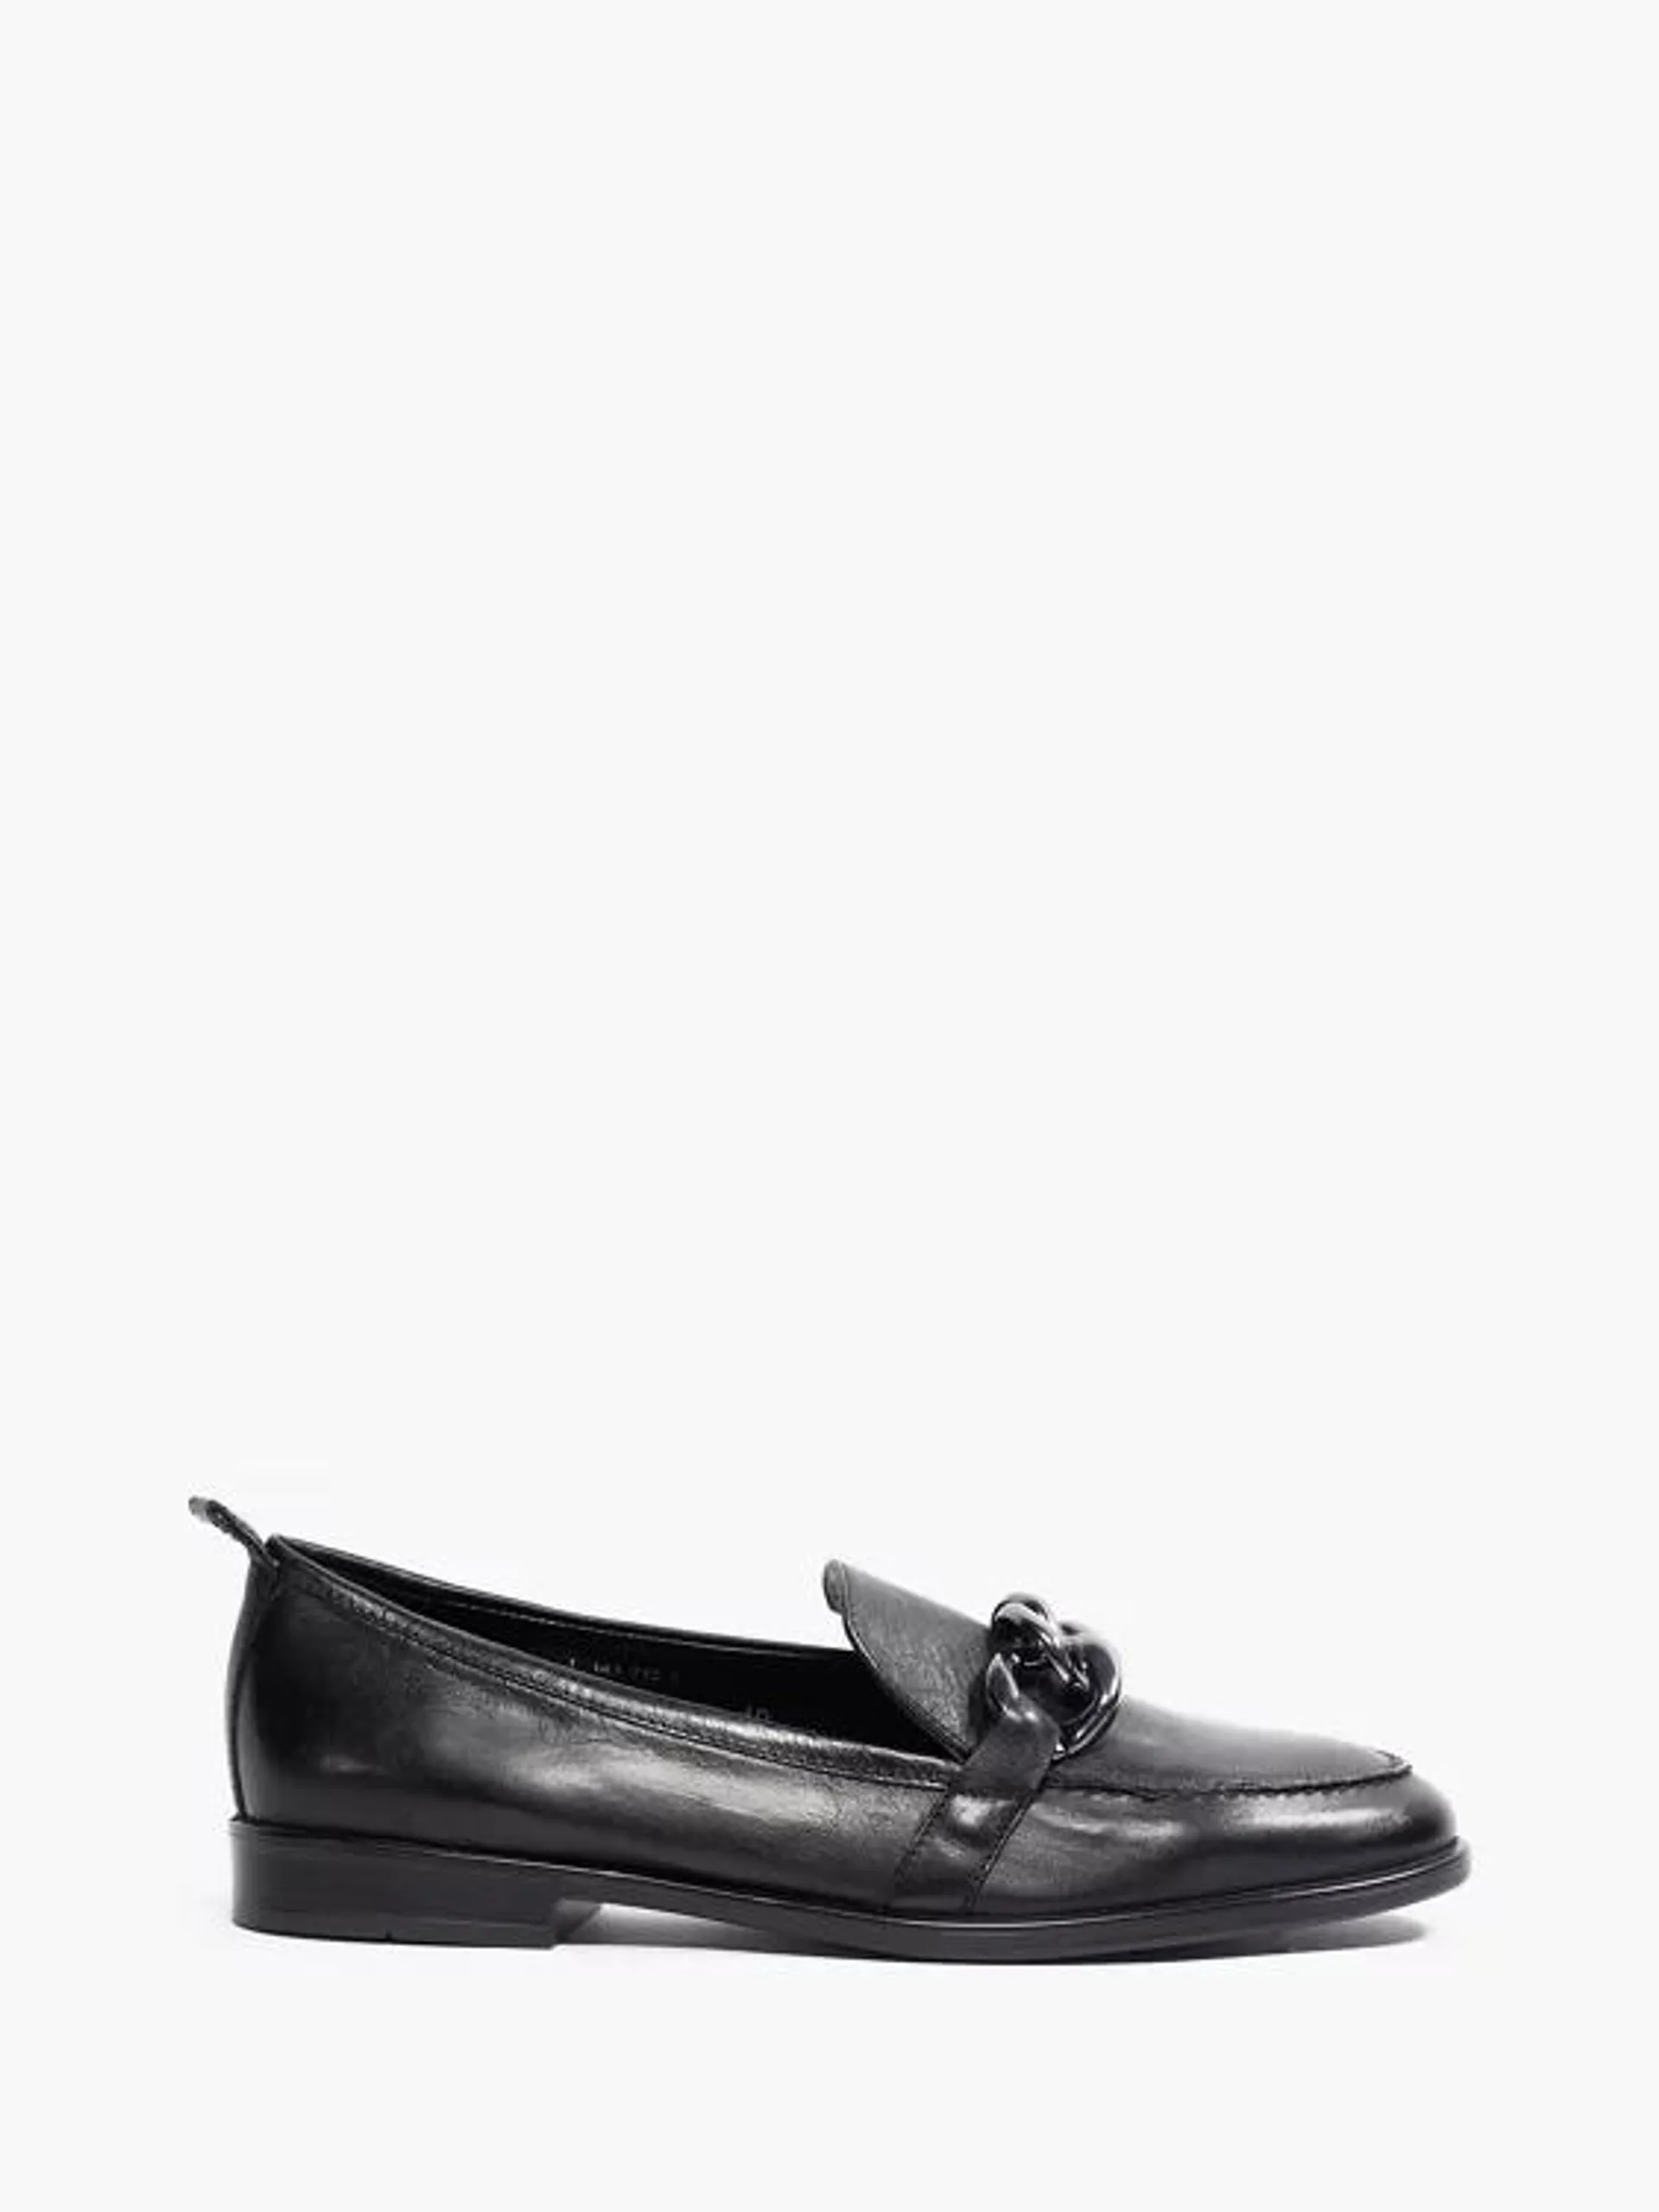 Black Leather Flat Loafer with Chain Detail